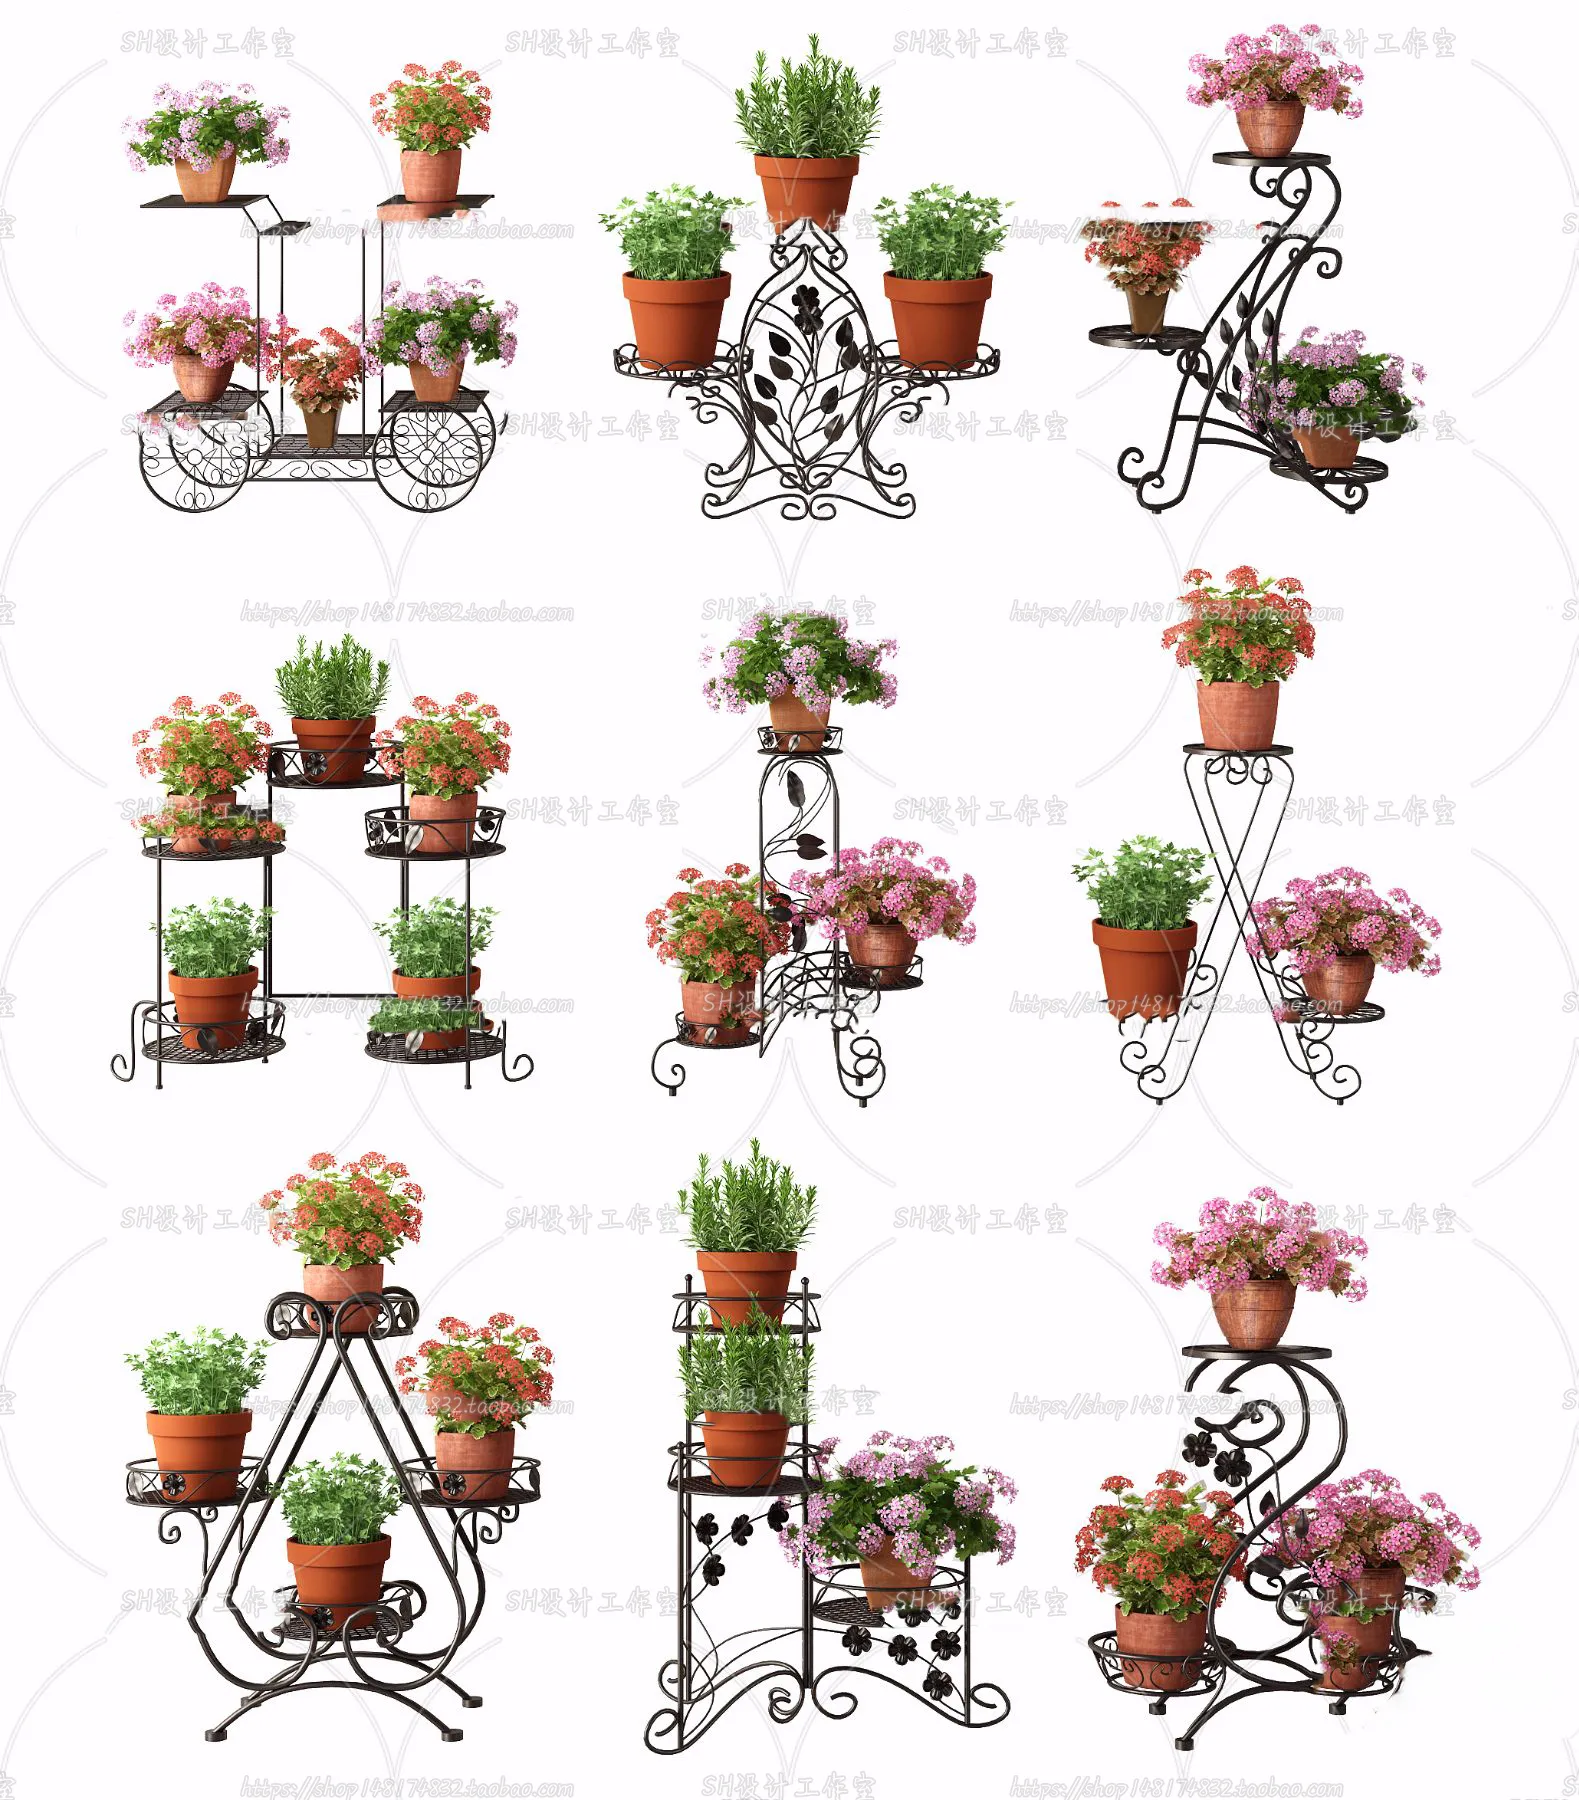 Plants and Flowers – 3Ds Models – 0244